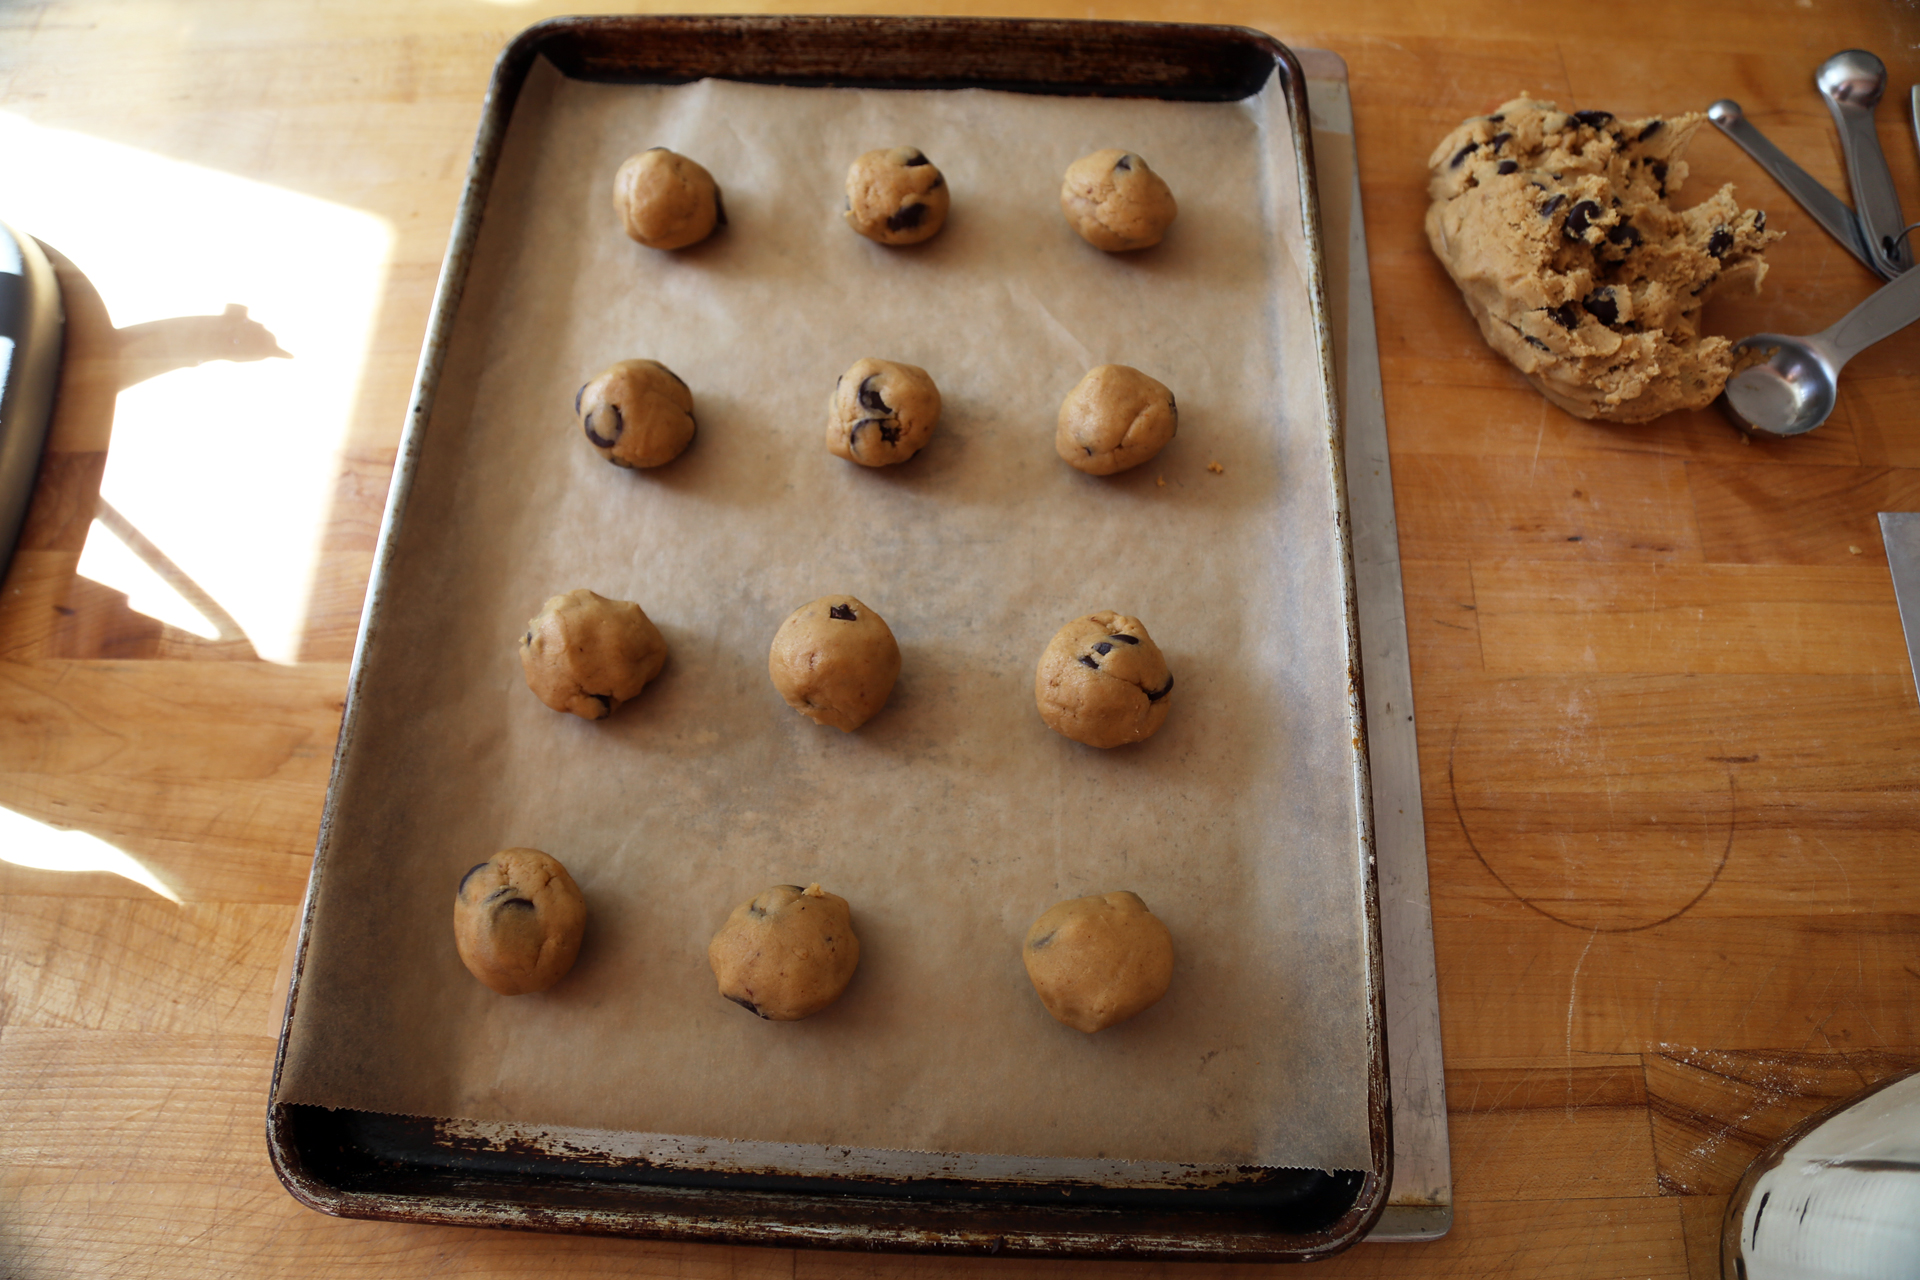 Roll tablespoonfuls of the dough into balls and space evenly on the baking sheets.